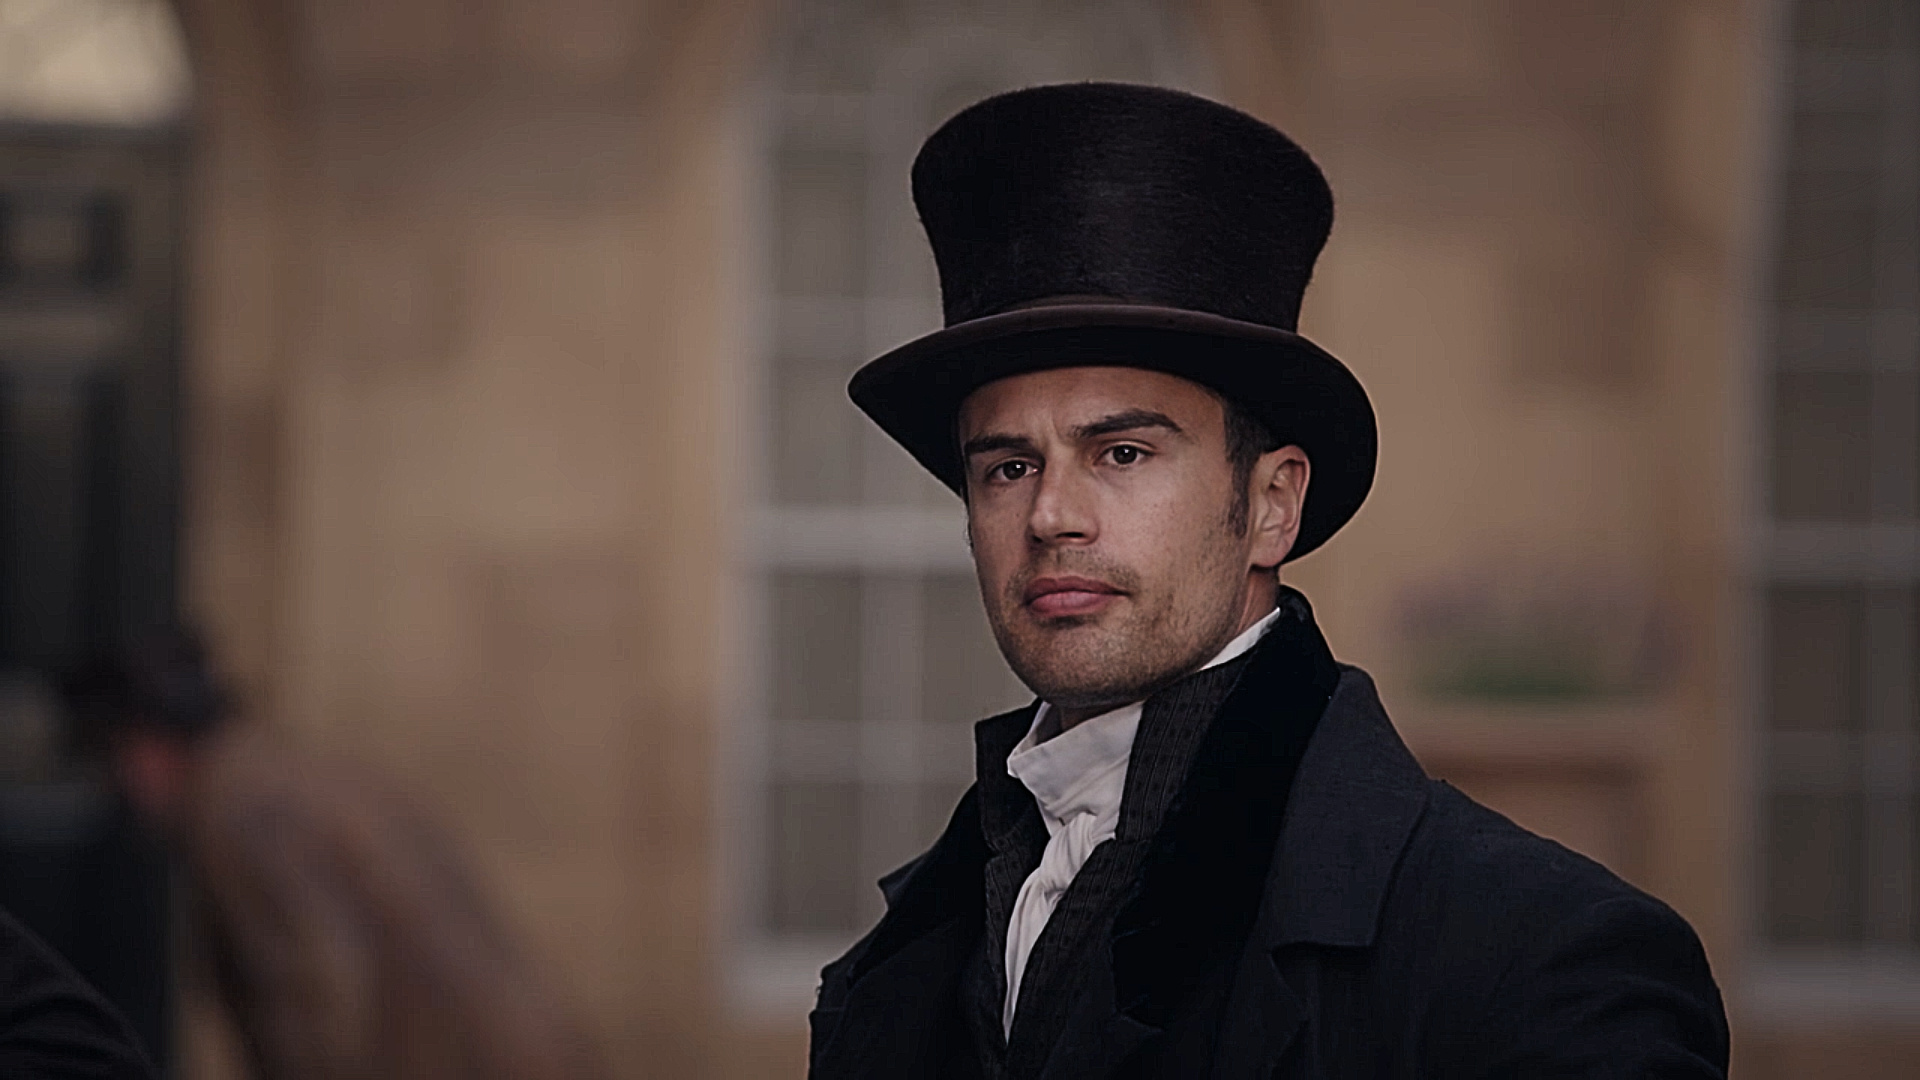 Sanditon (TV Series): Sidney Parker, Played by star Theo James, Appeared in Downton Abbey, Divergent. 1920x1080 Full HD Wallpaper.